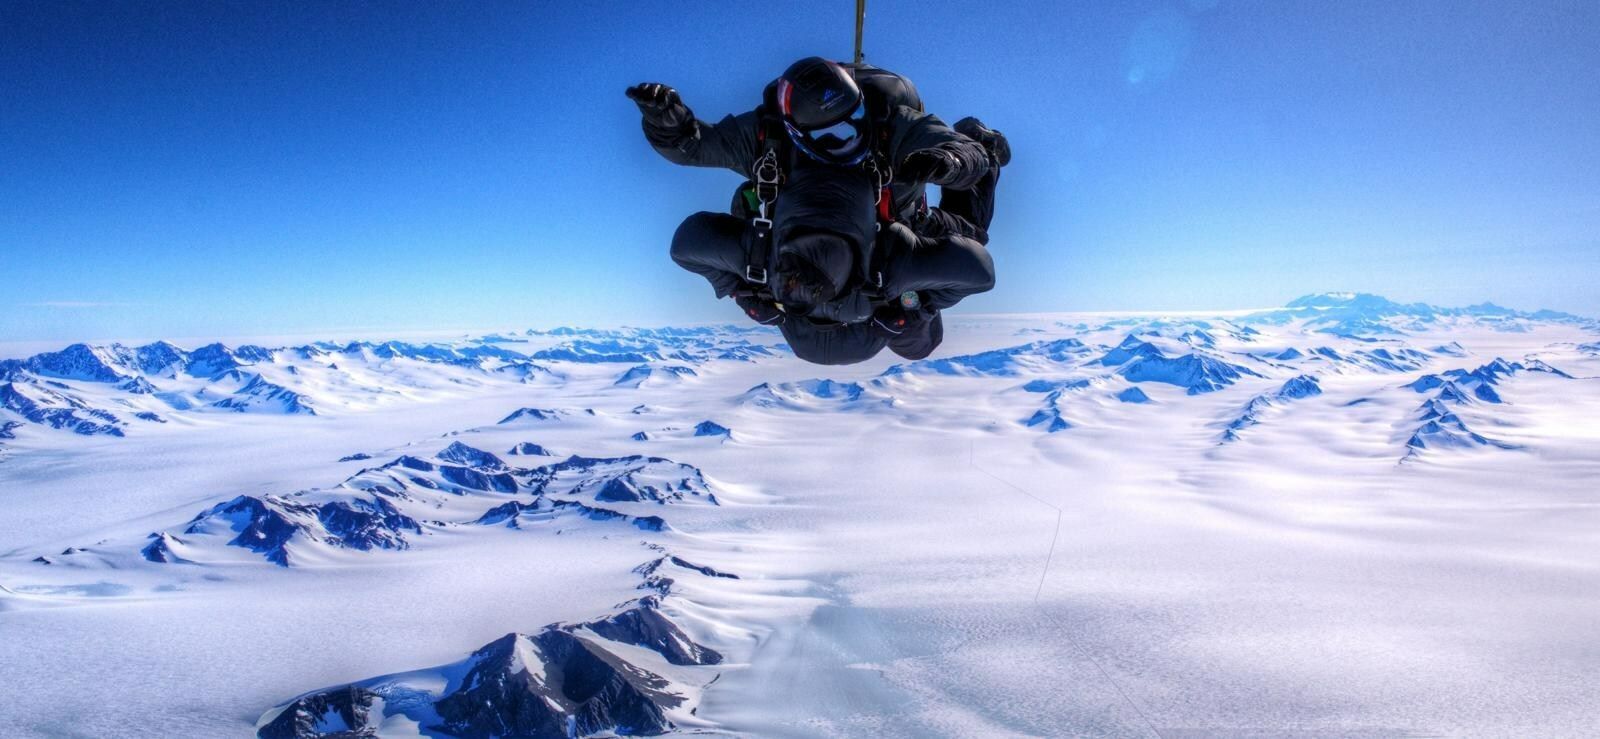 Fastest time to tandem skydive all seven continents: Jim Wigginton and Nick Kush